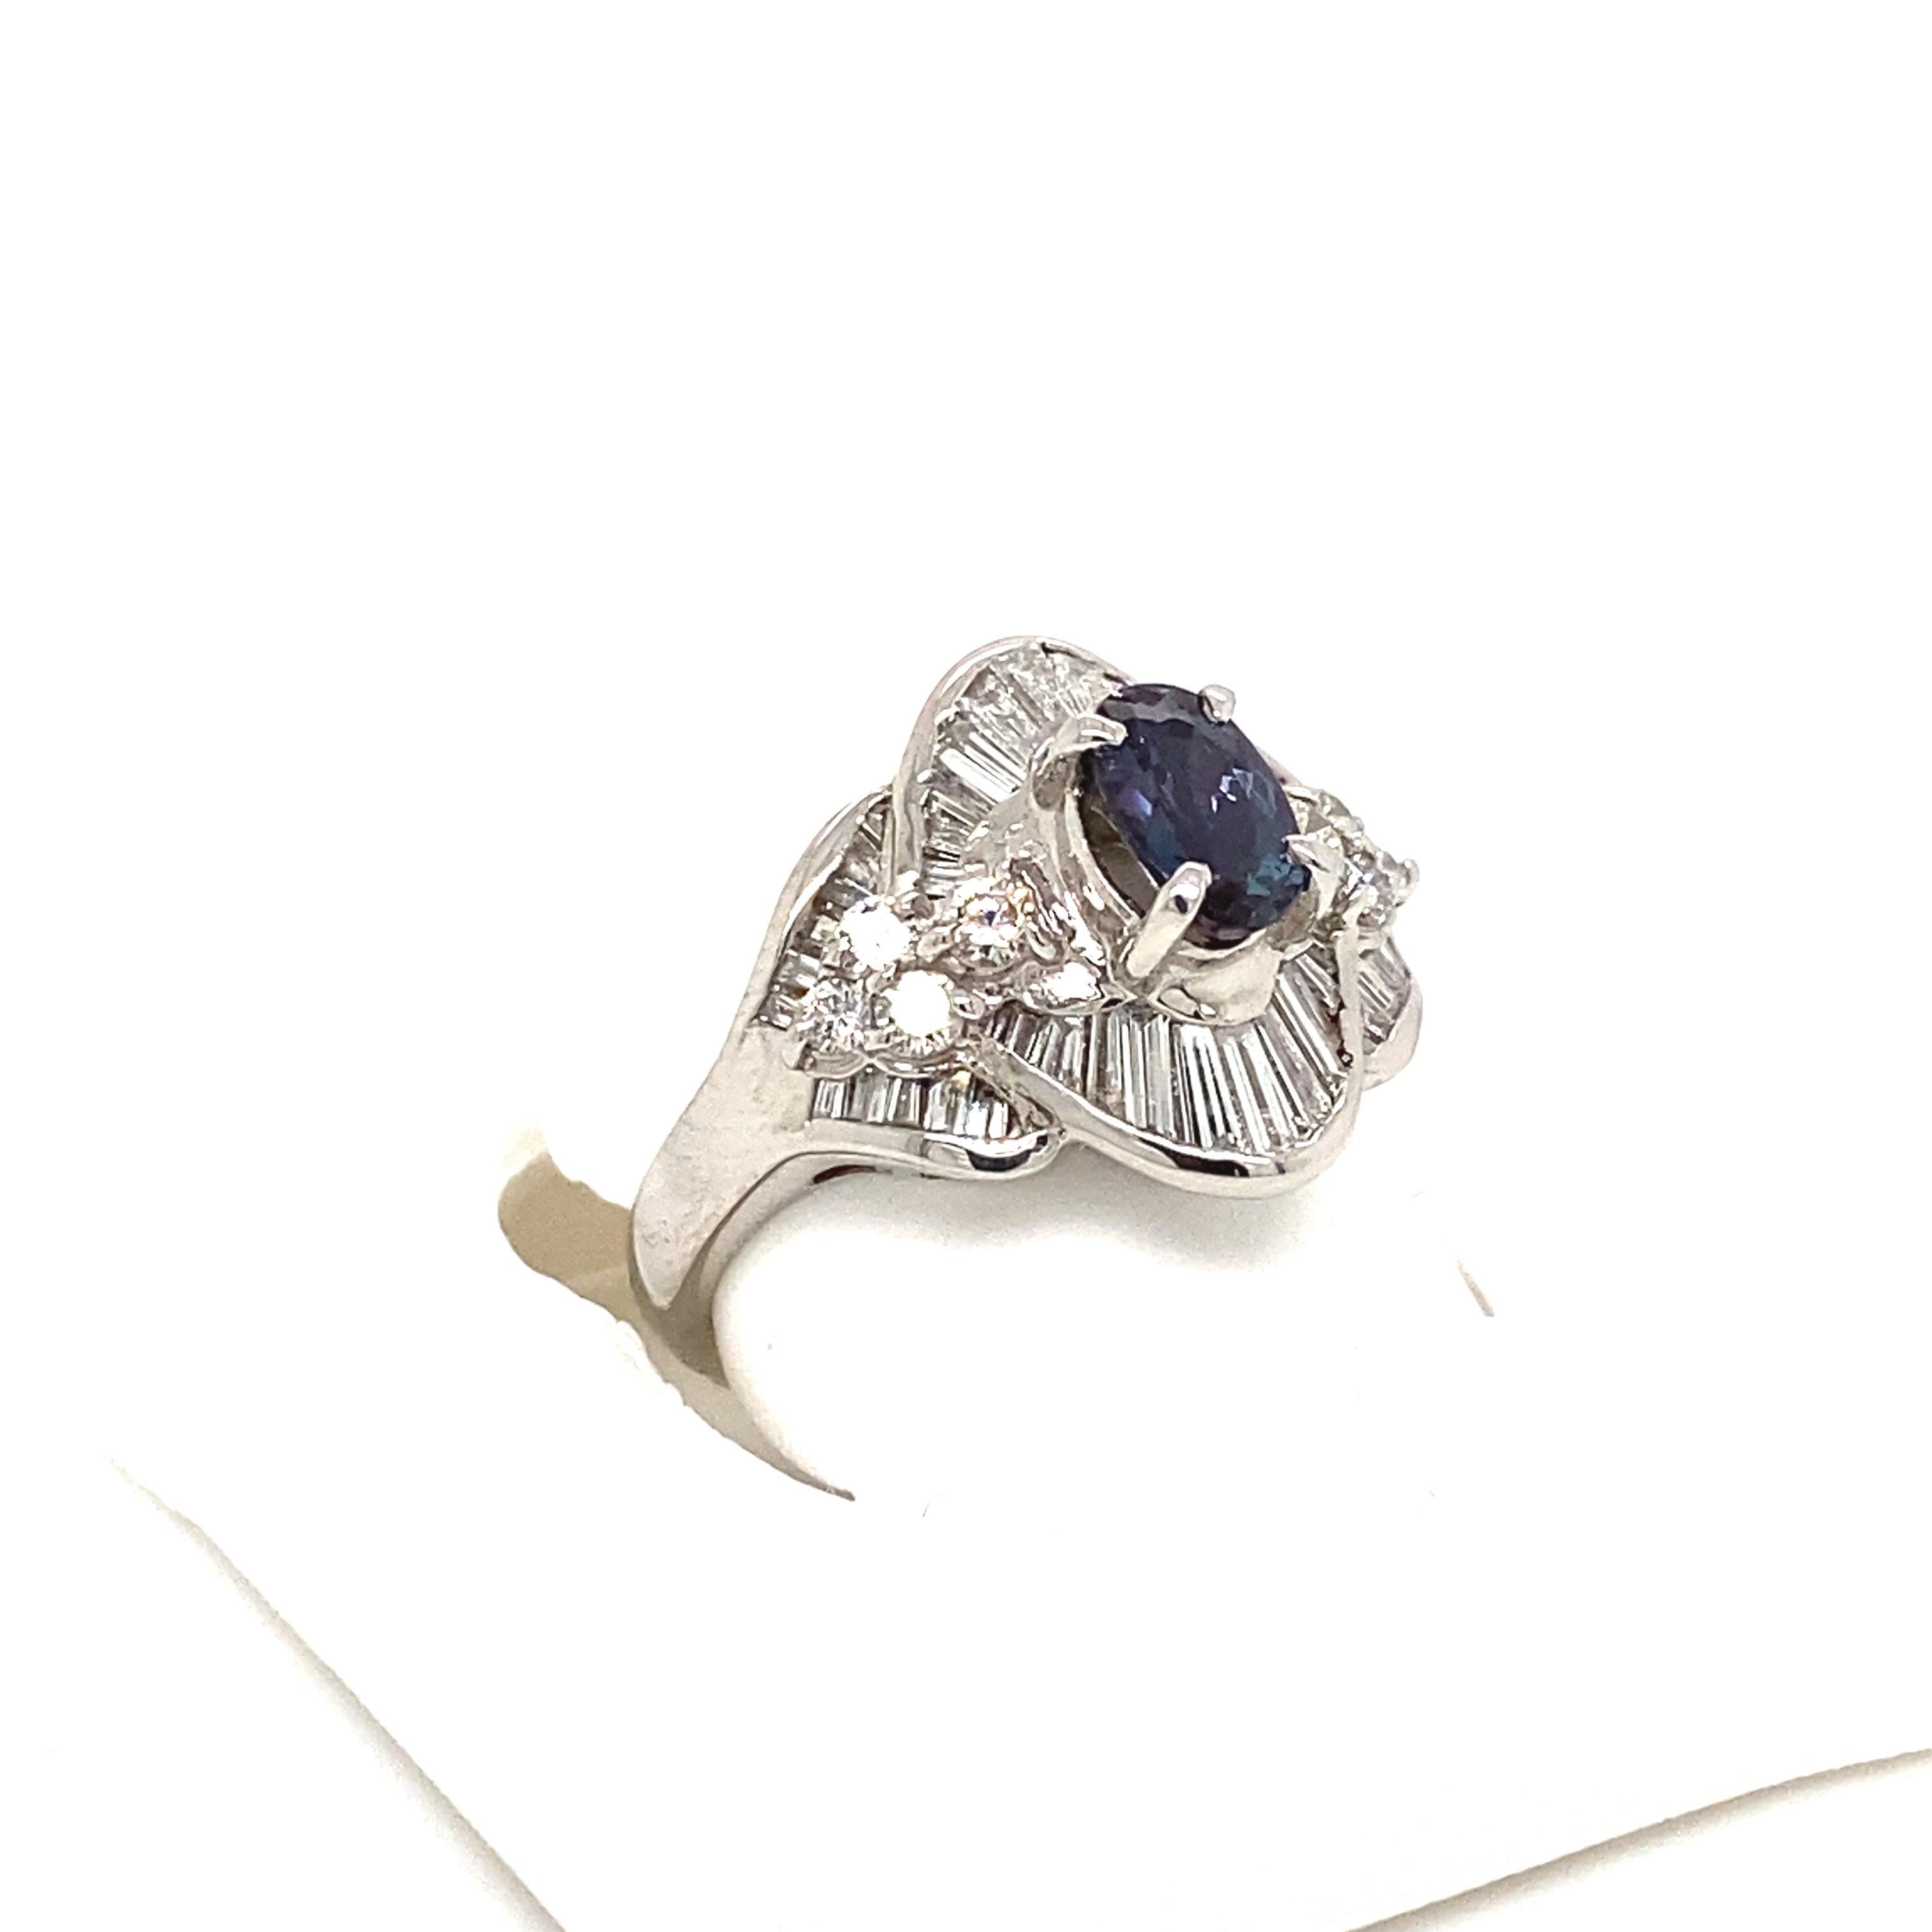 This is a gorgeous natural AAA quality oval Alexandrite surrounded by dainty diamonds that is set in a vintage platinum setting. This ring features a natural 0.85 carat brazillian oval alexandrite that is certified by the Gemological Institute of